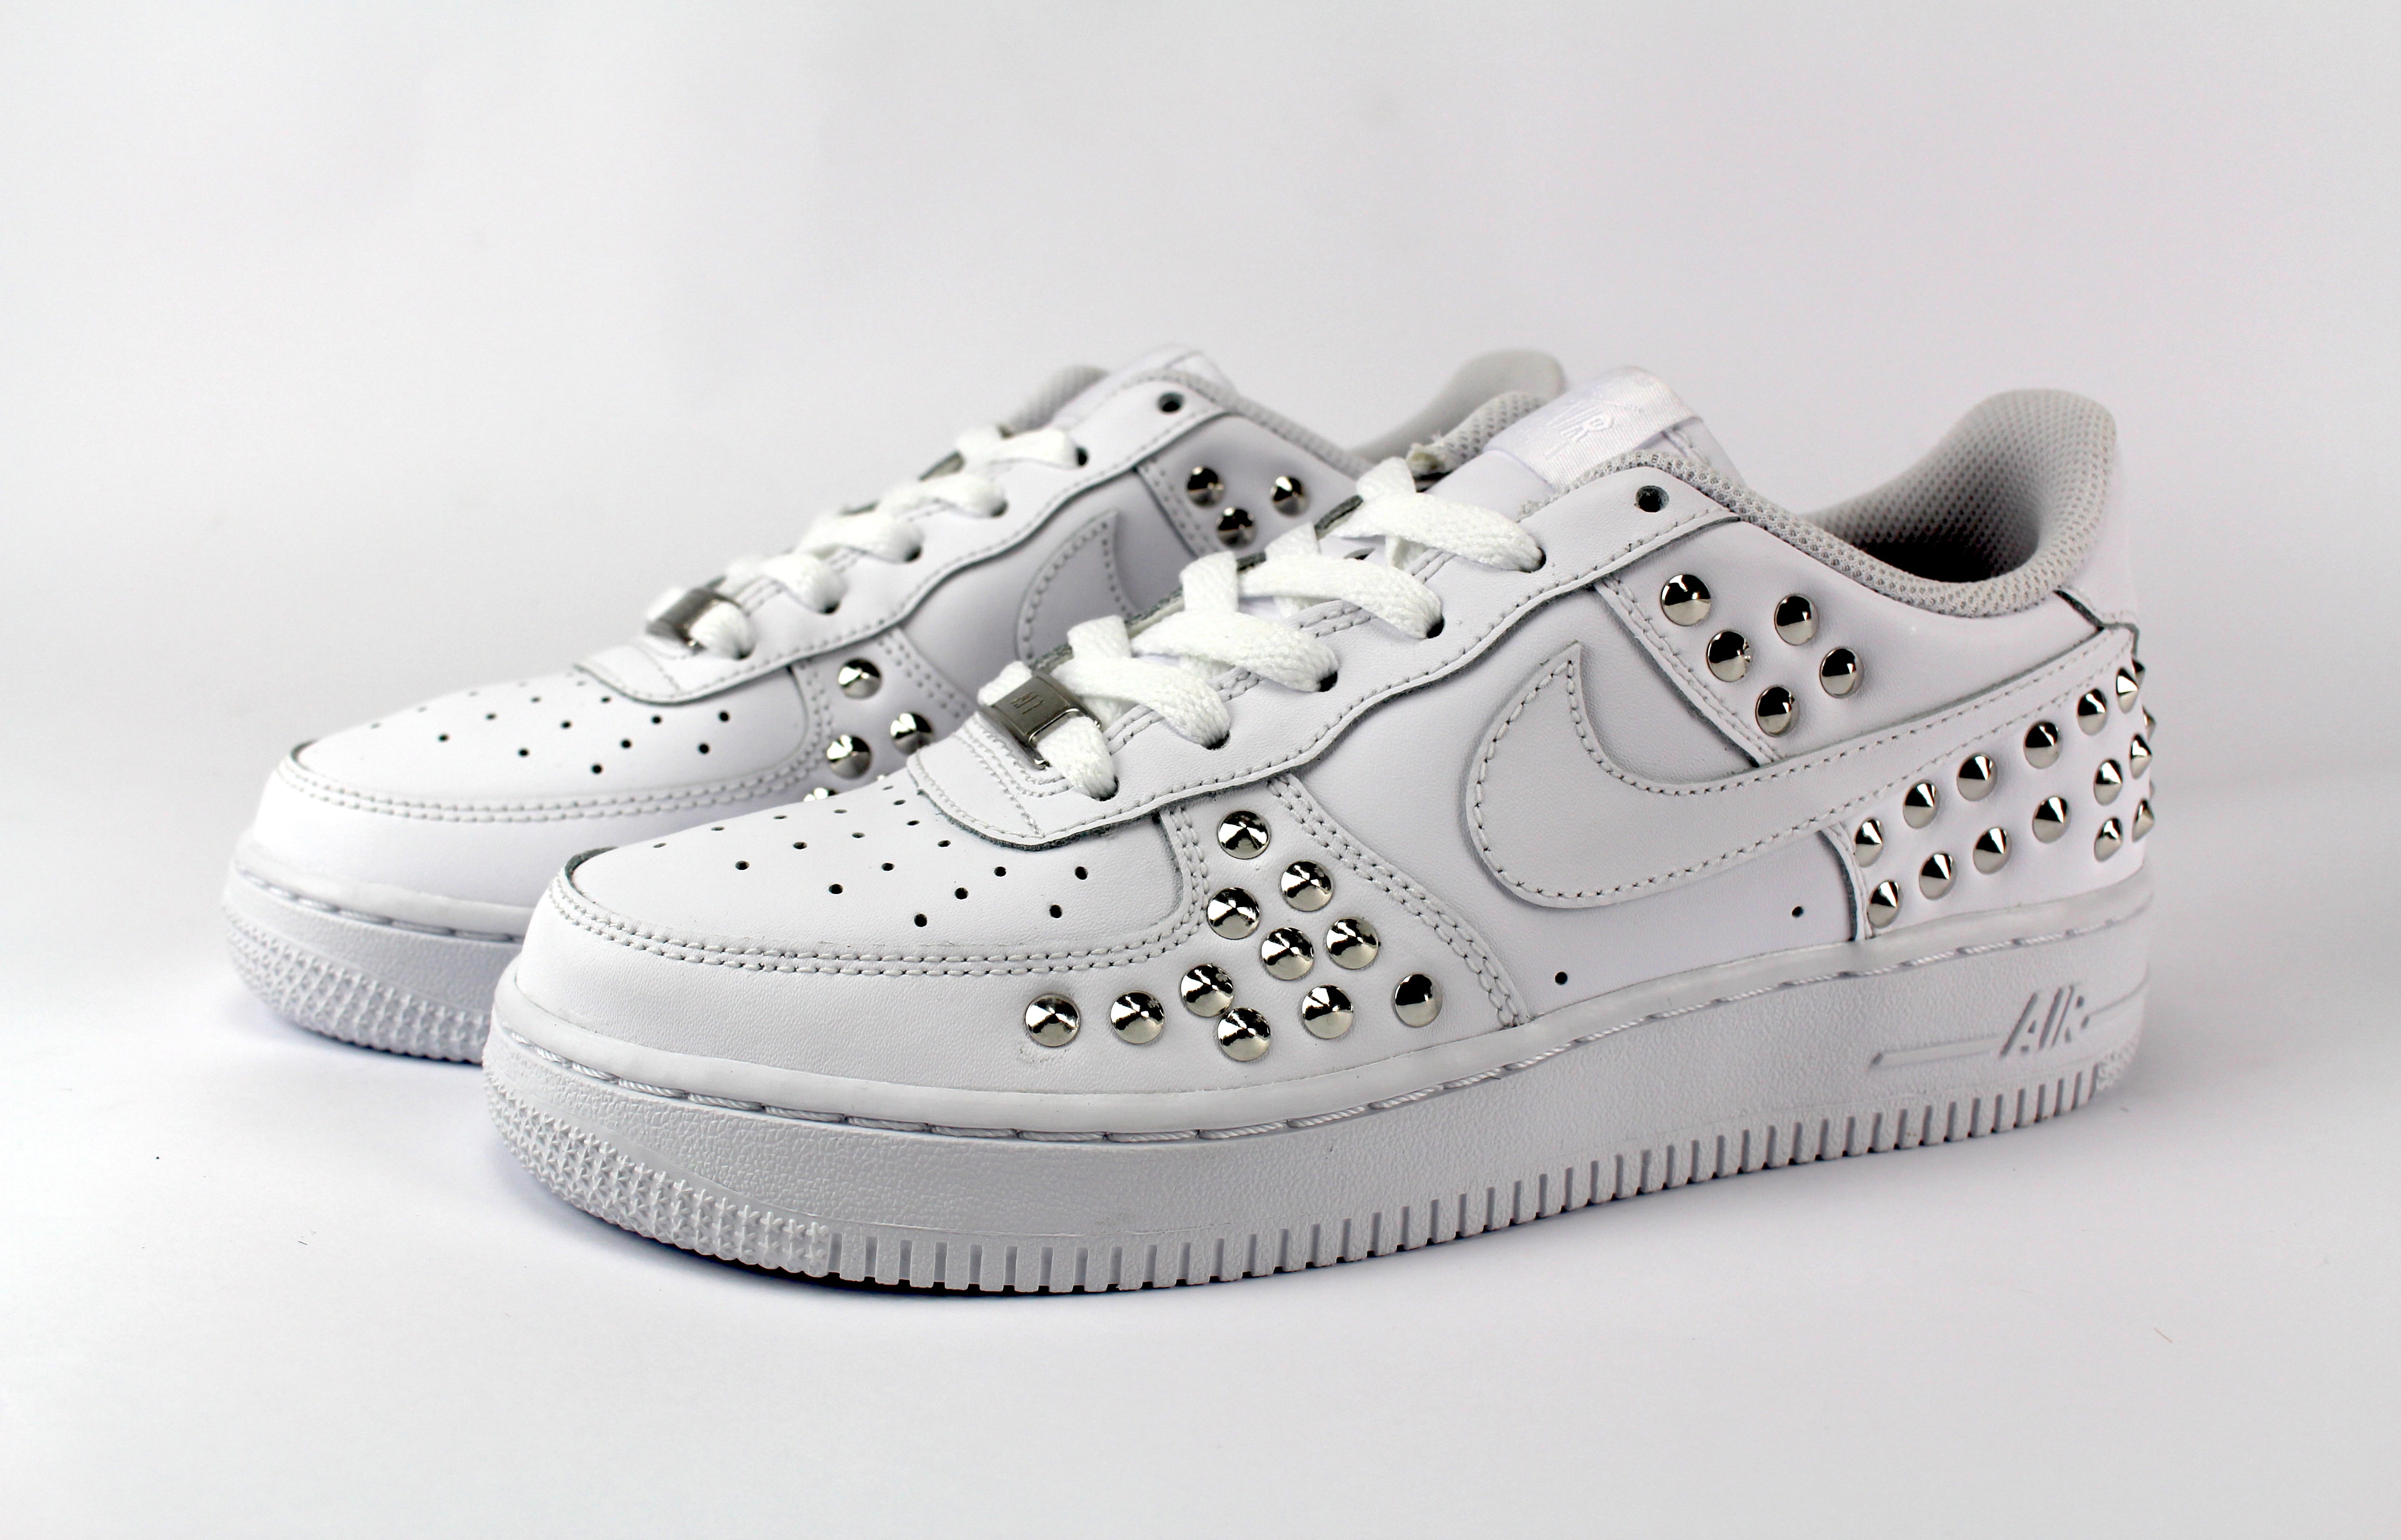 nike air force 1 borchie